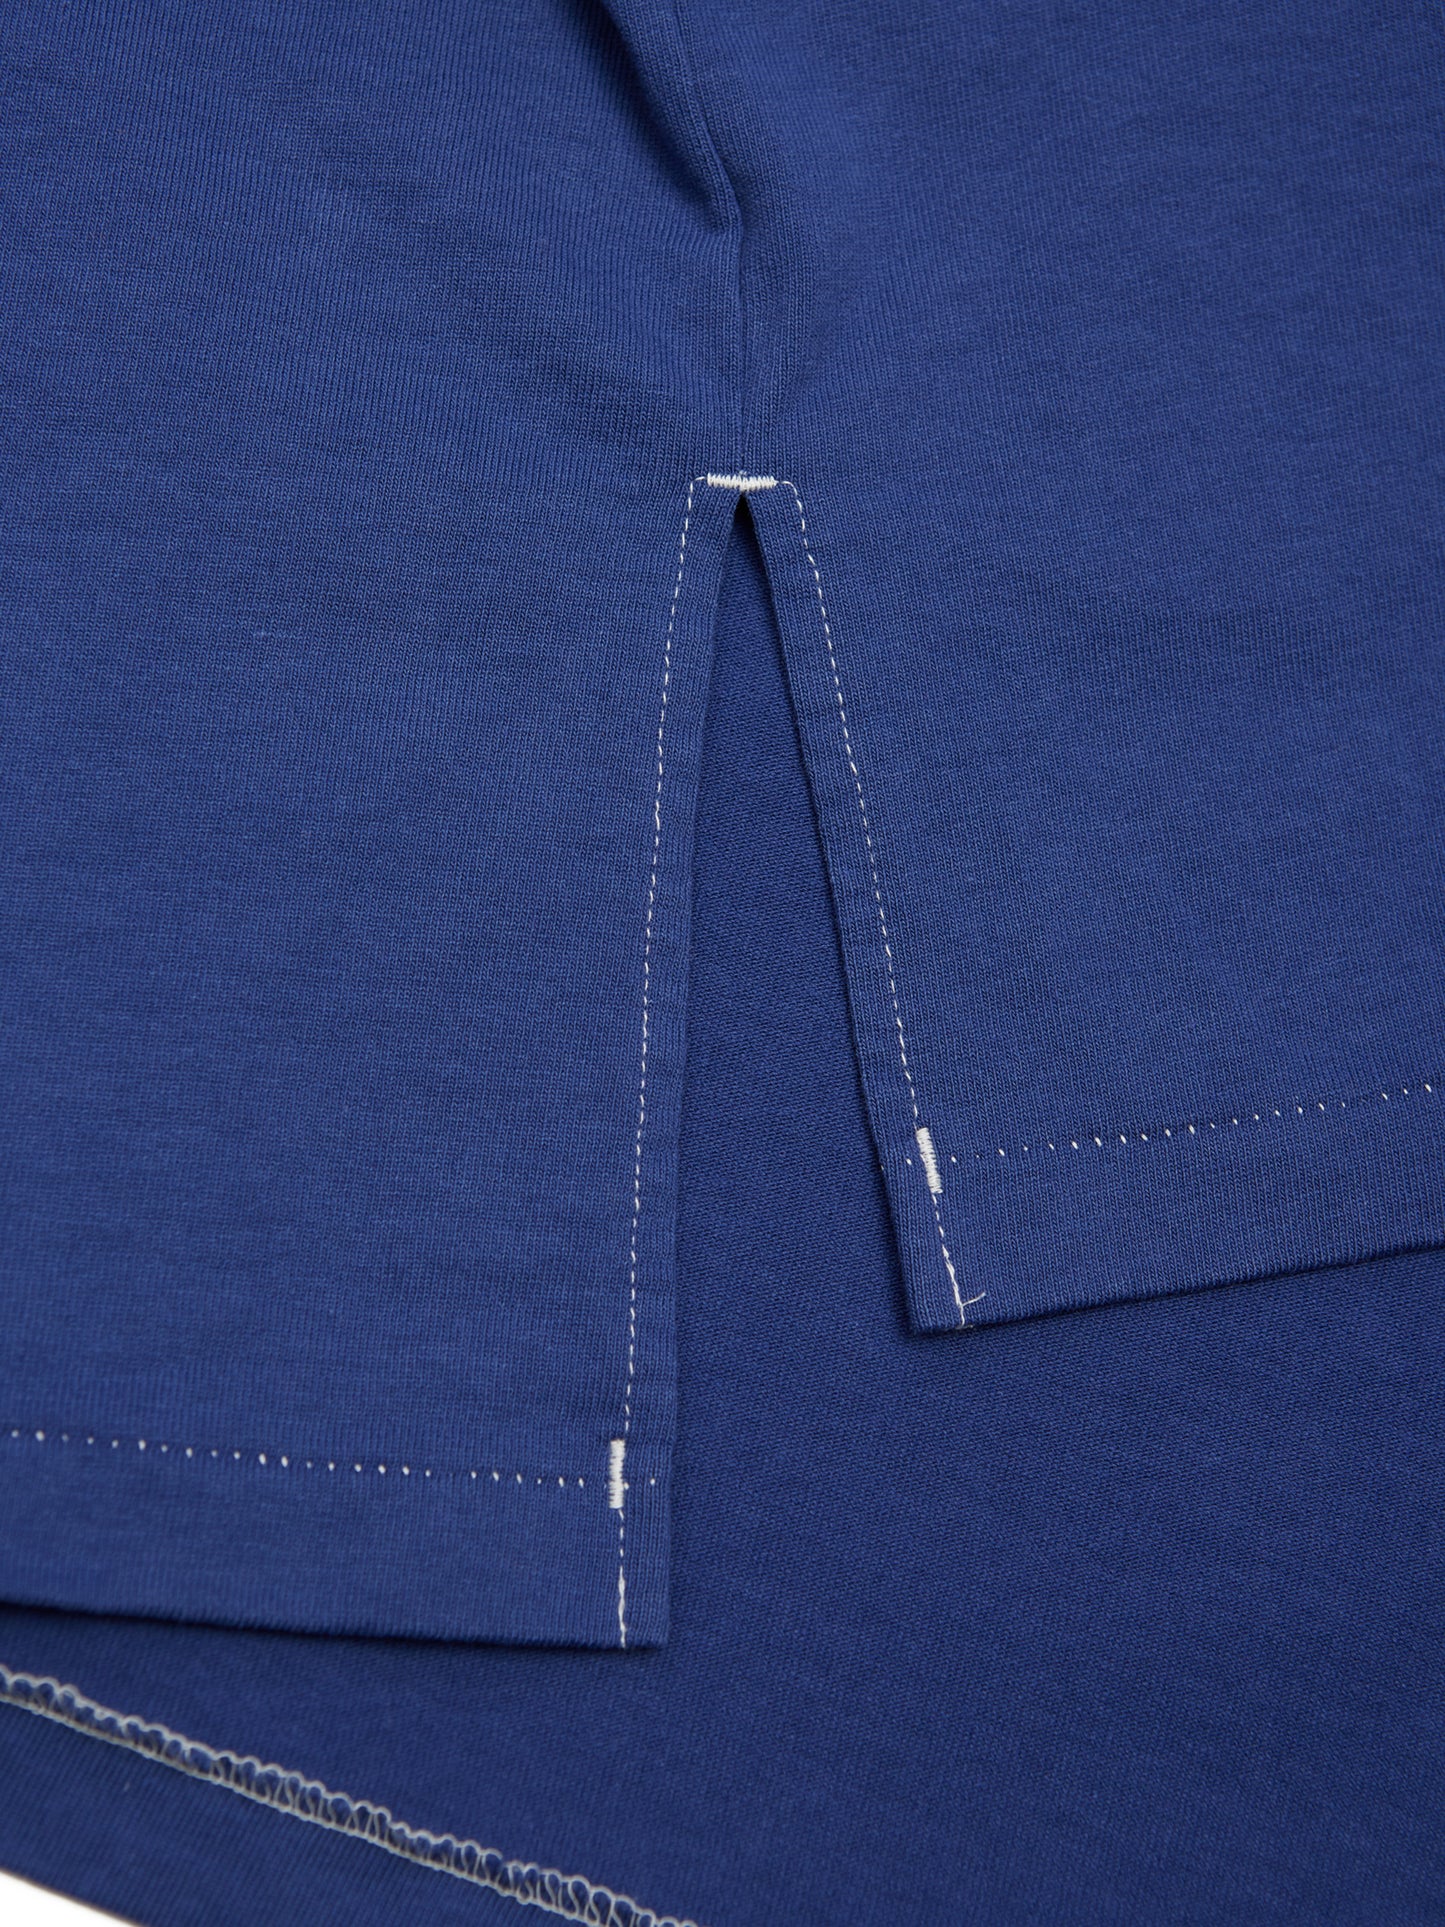 BAGGY BOAT L/S TEE COTTON JERSEY AM-C0205 Blue